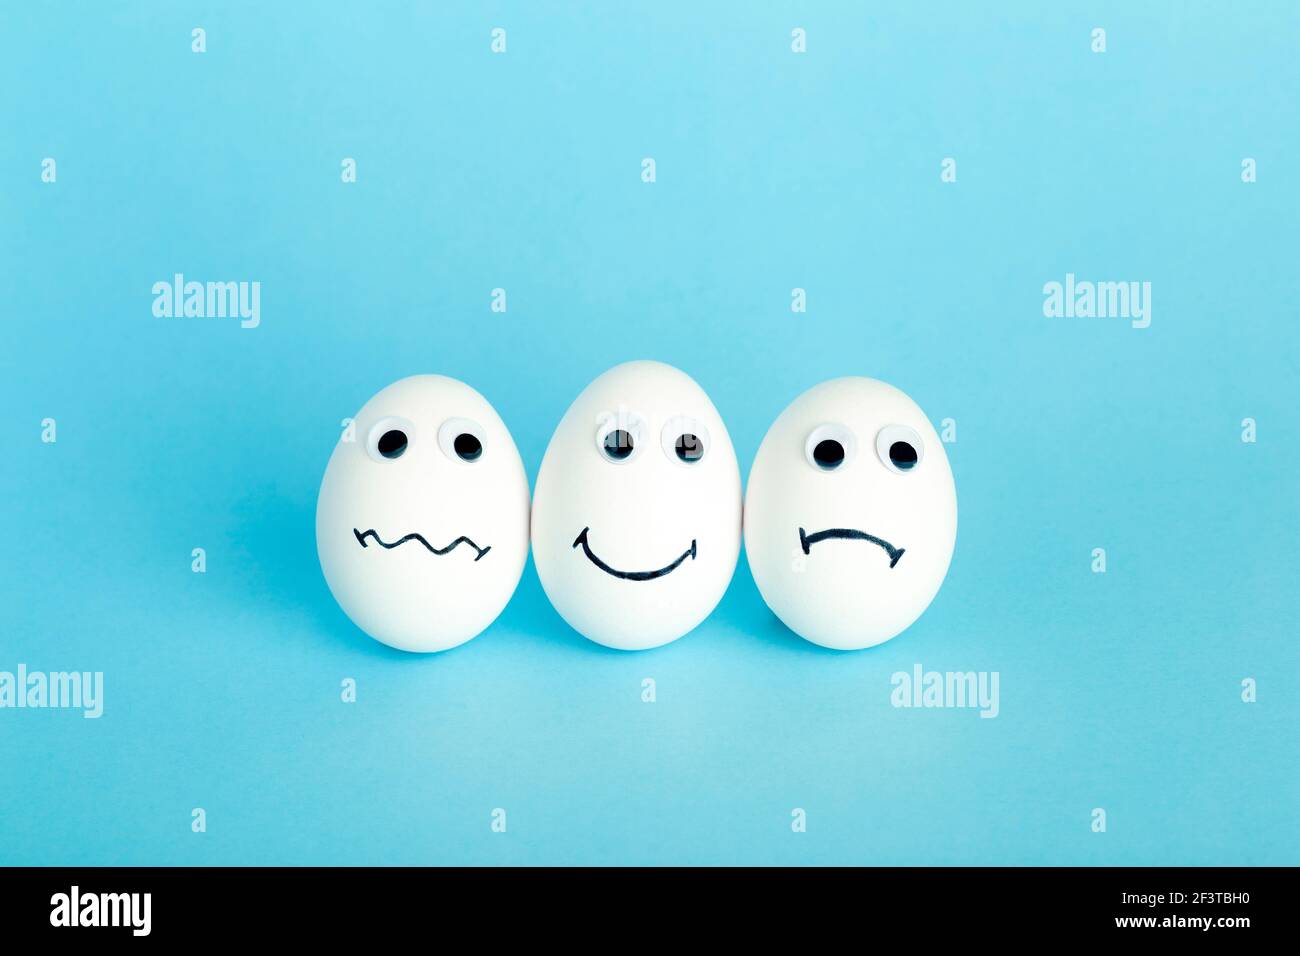 Fun creative food for kids. Eggs minimal concept. White funny eggs for breakfast on a colored background. Stock Photo